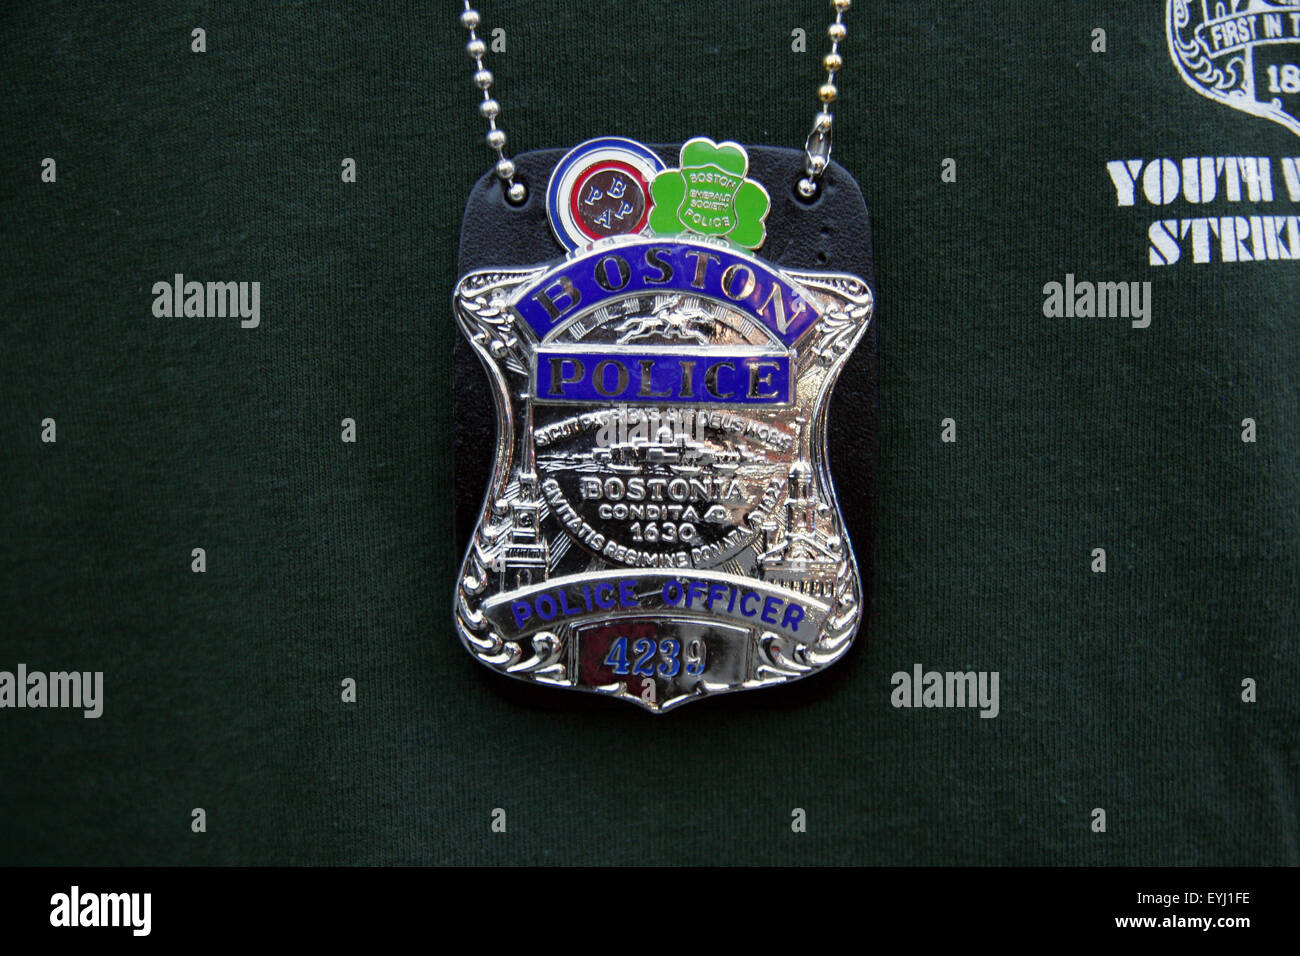 Boston police badge worn by plain clothed officer, Boston, Massachusetts, USA Stock Photo